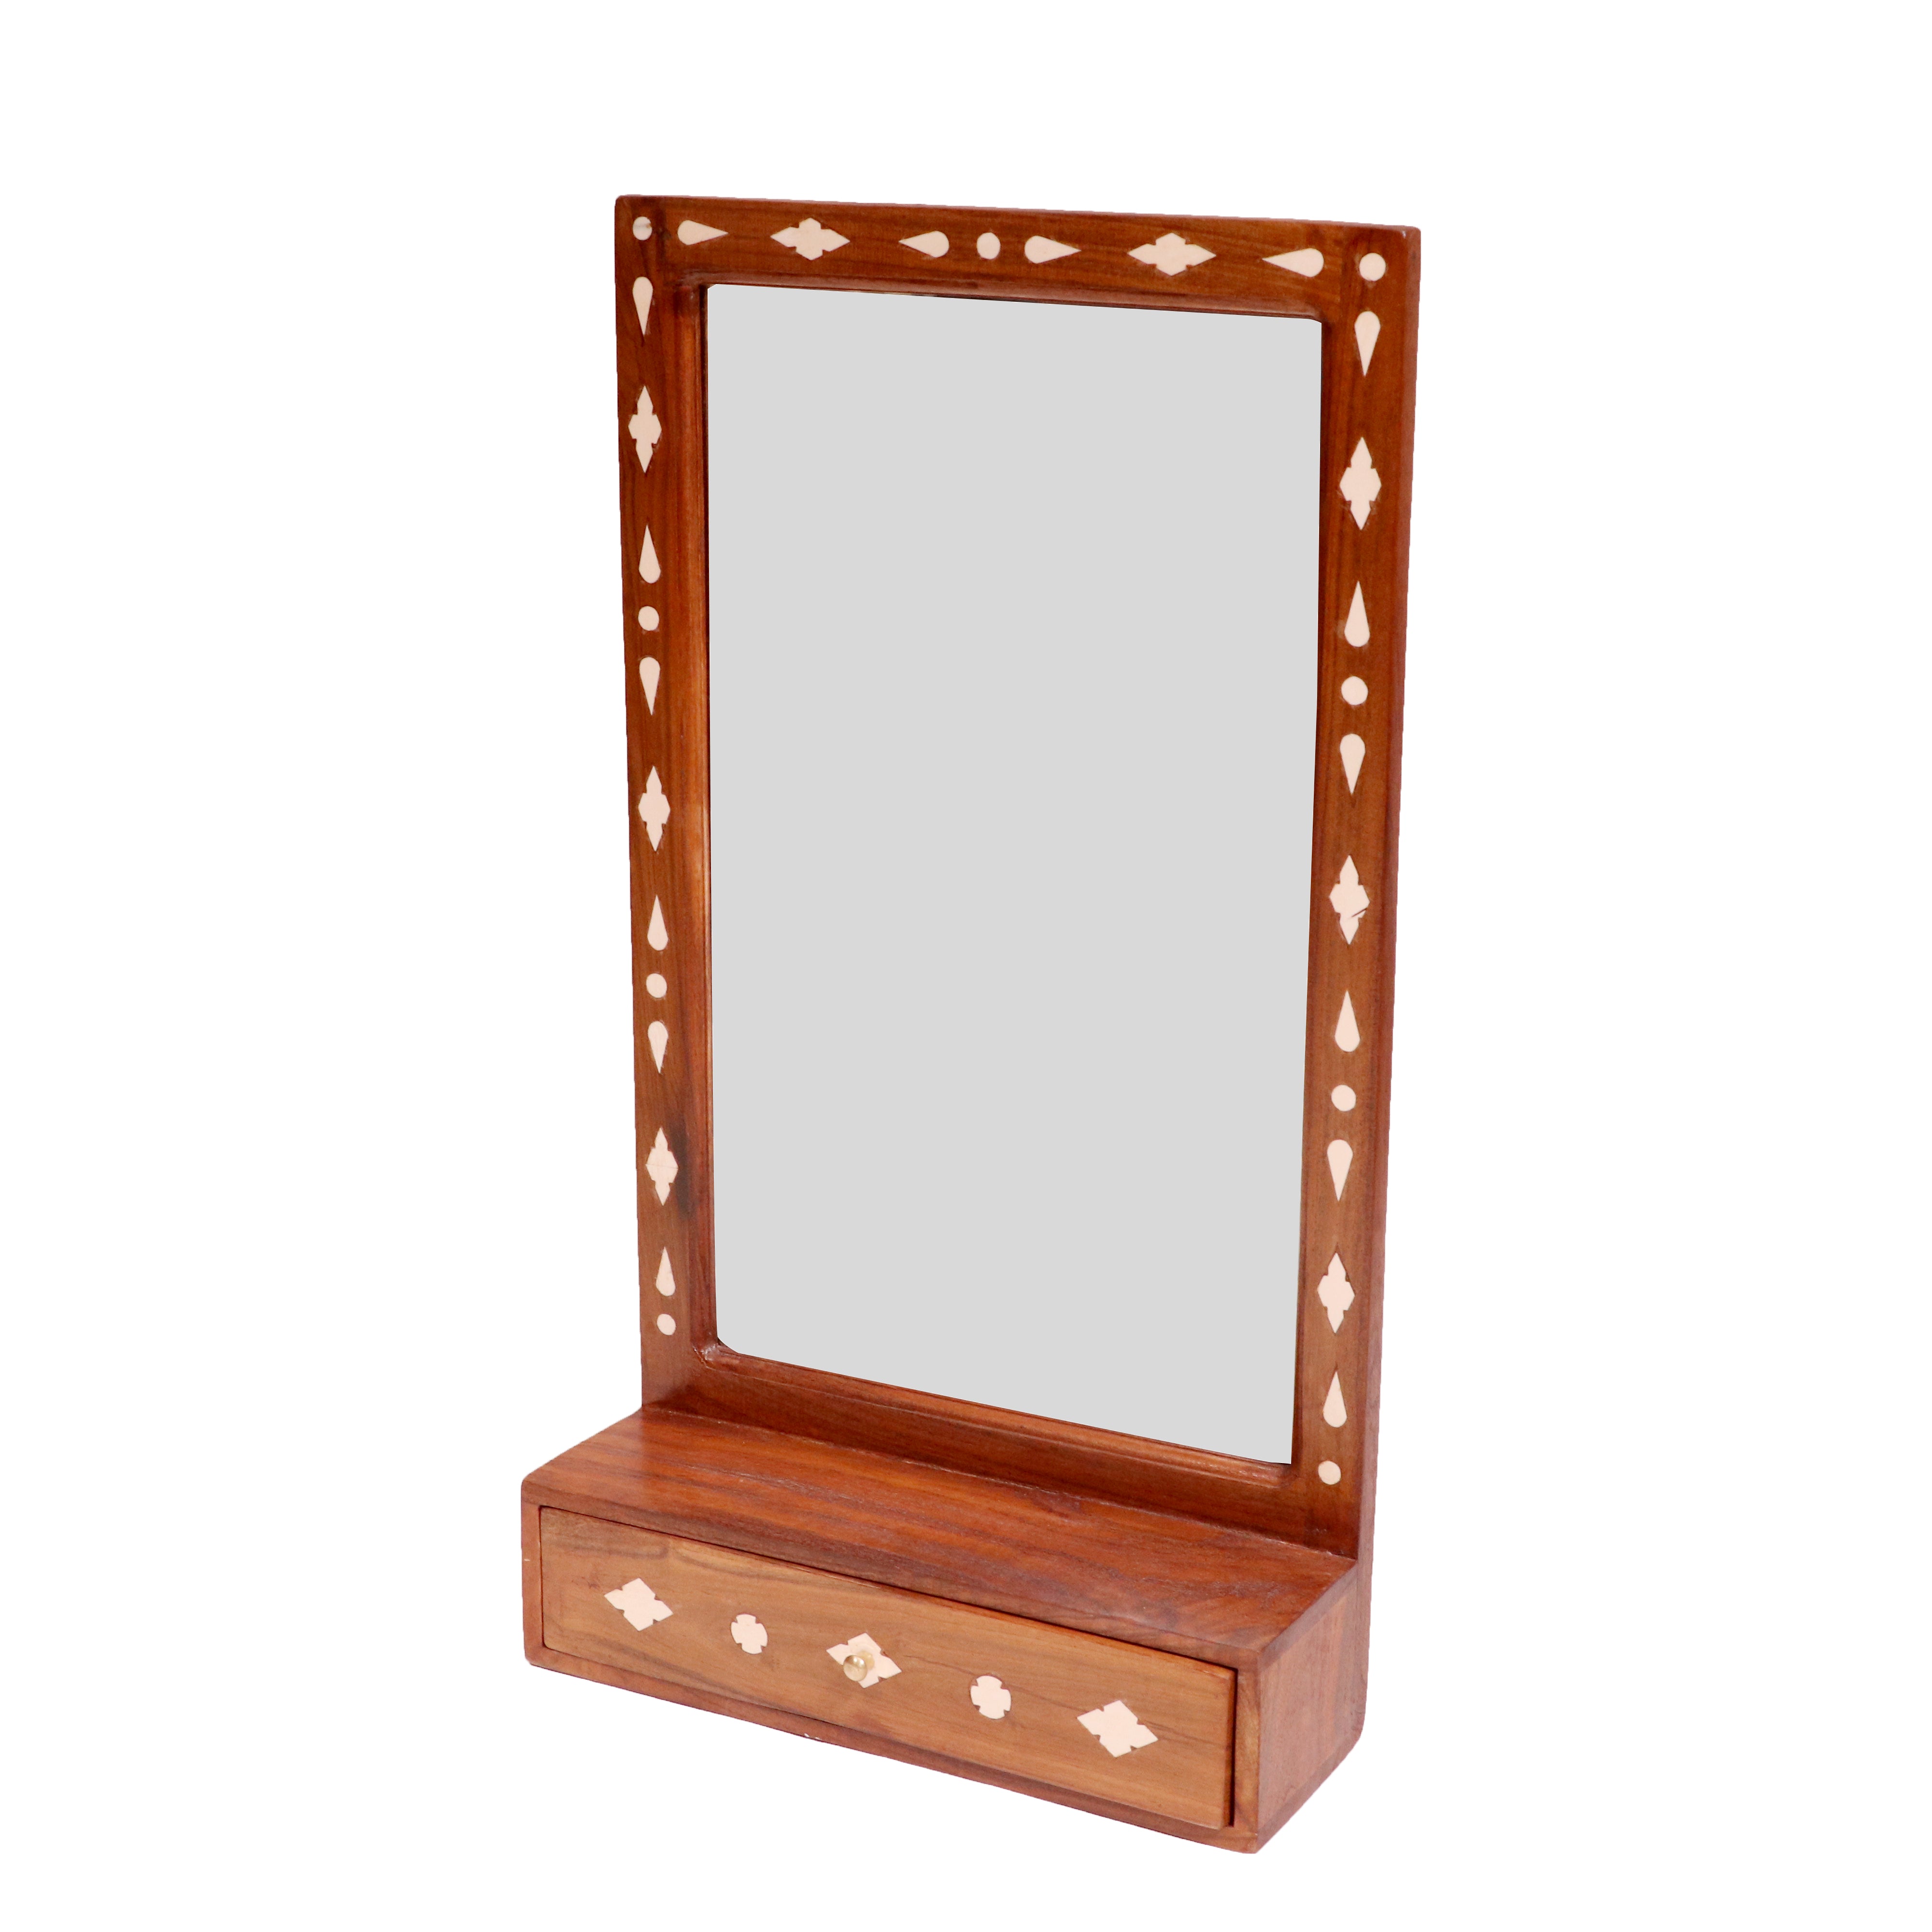 Natural Rustic Inlay Border Designed Wooden Handmade Mirror with Single Drawer Mirror